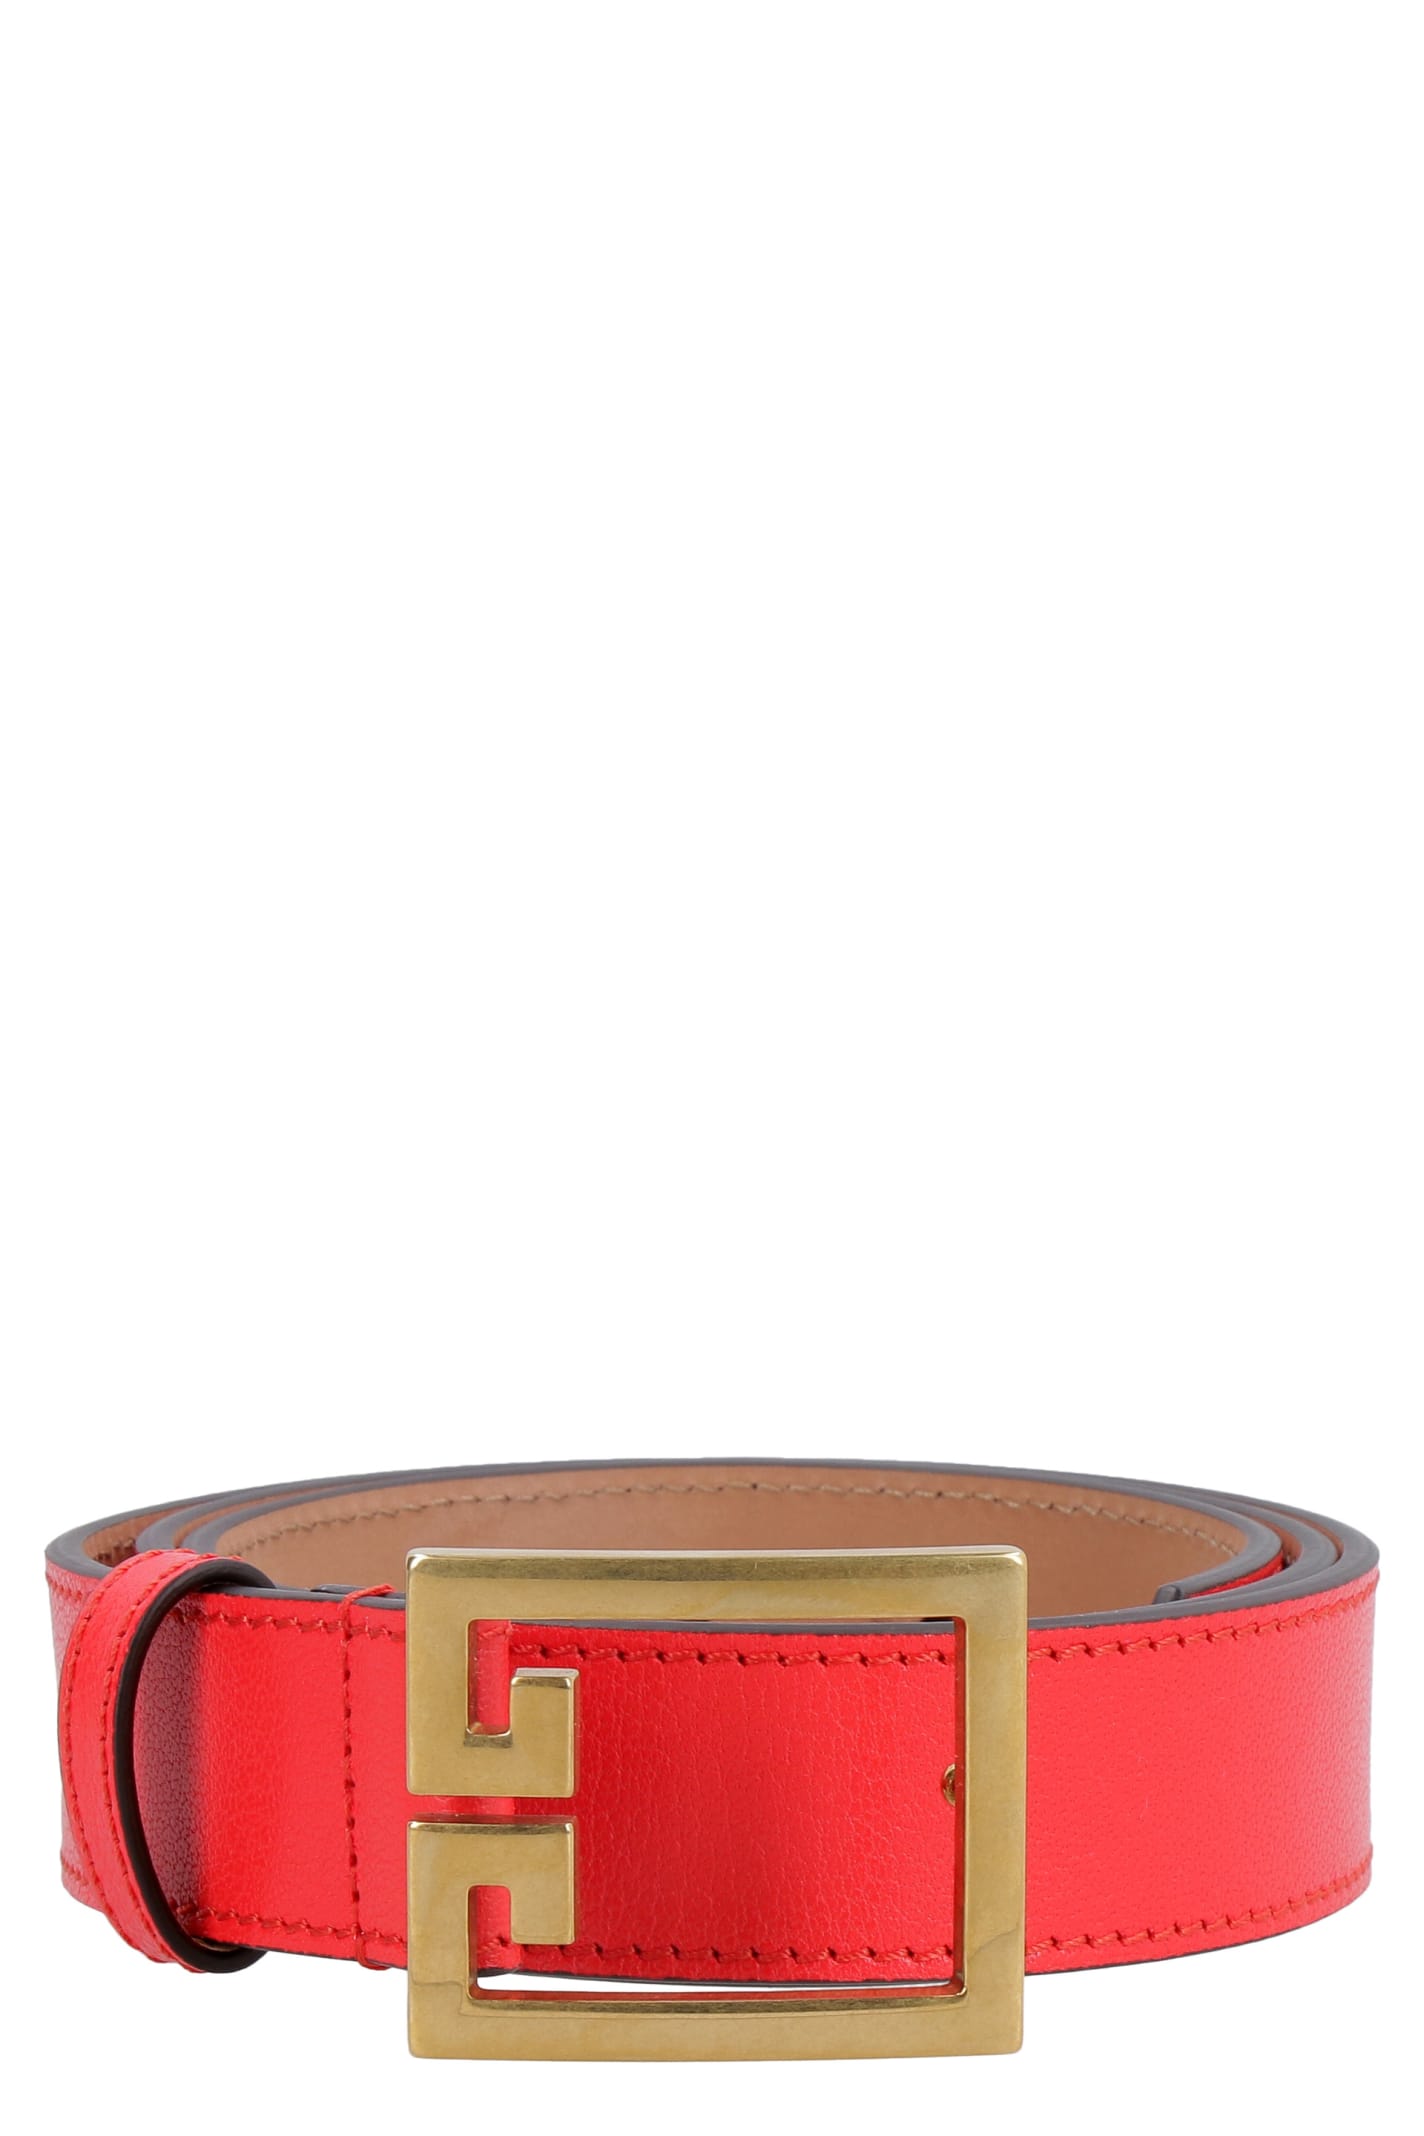 GIVENCHY GIVENCHY LEATHER BELT WITH BUCKLE,11246913